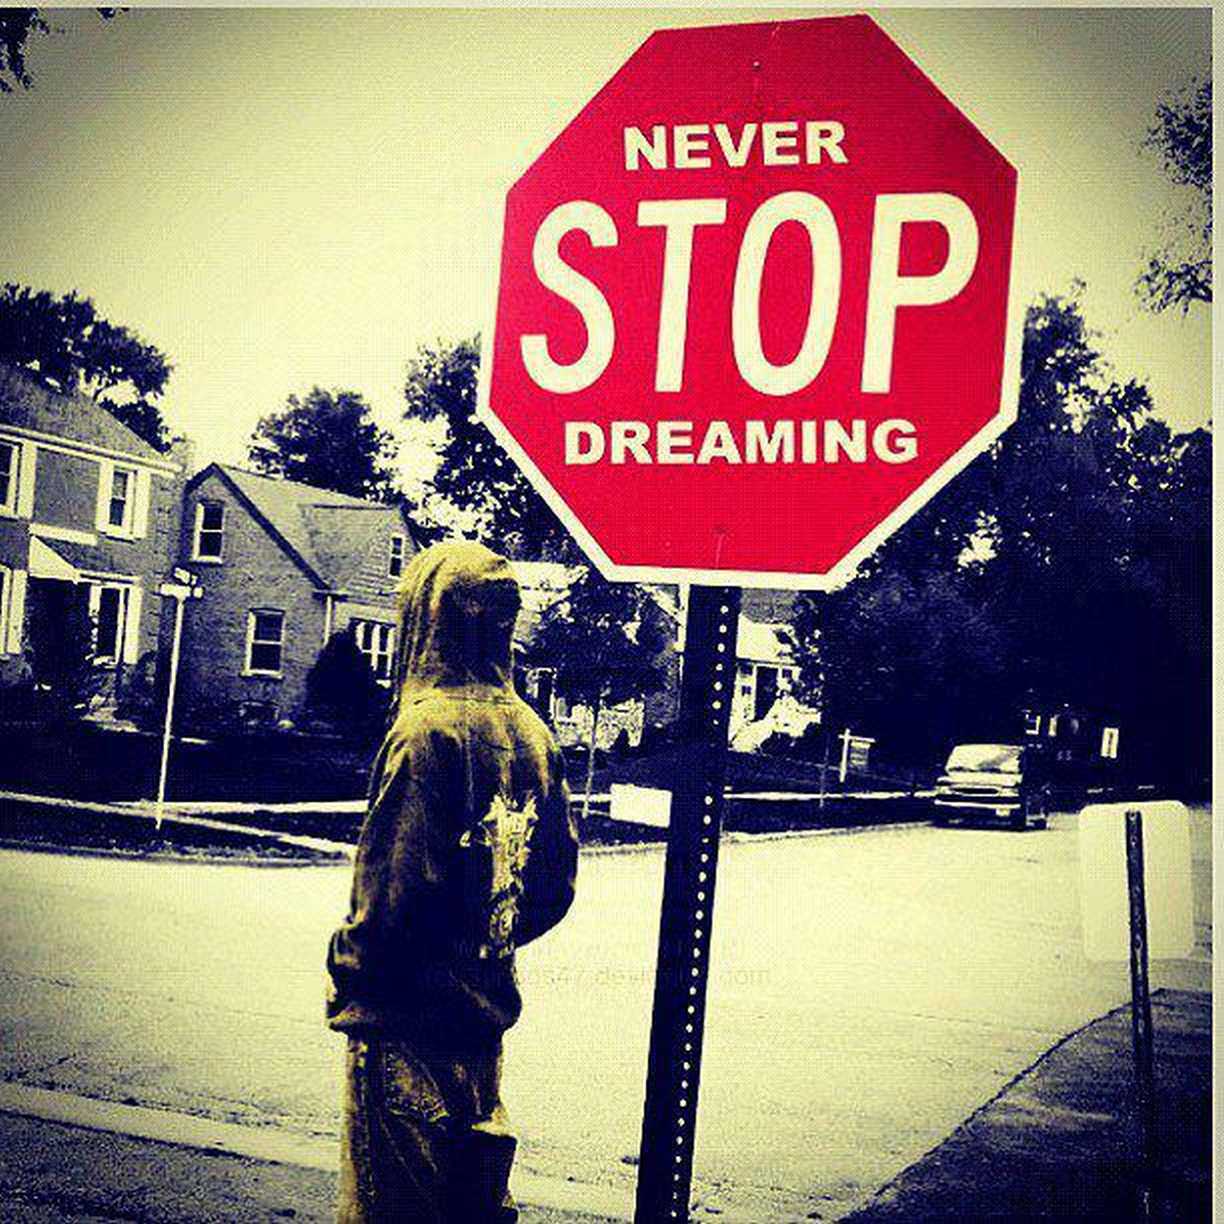 Never Stop Dreaming Quotes. QuotesGram jpg (1224x1224)